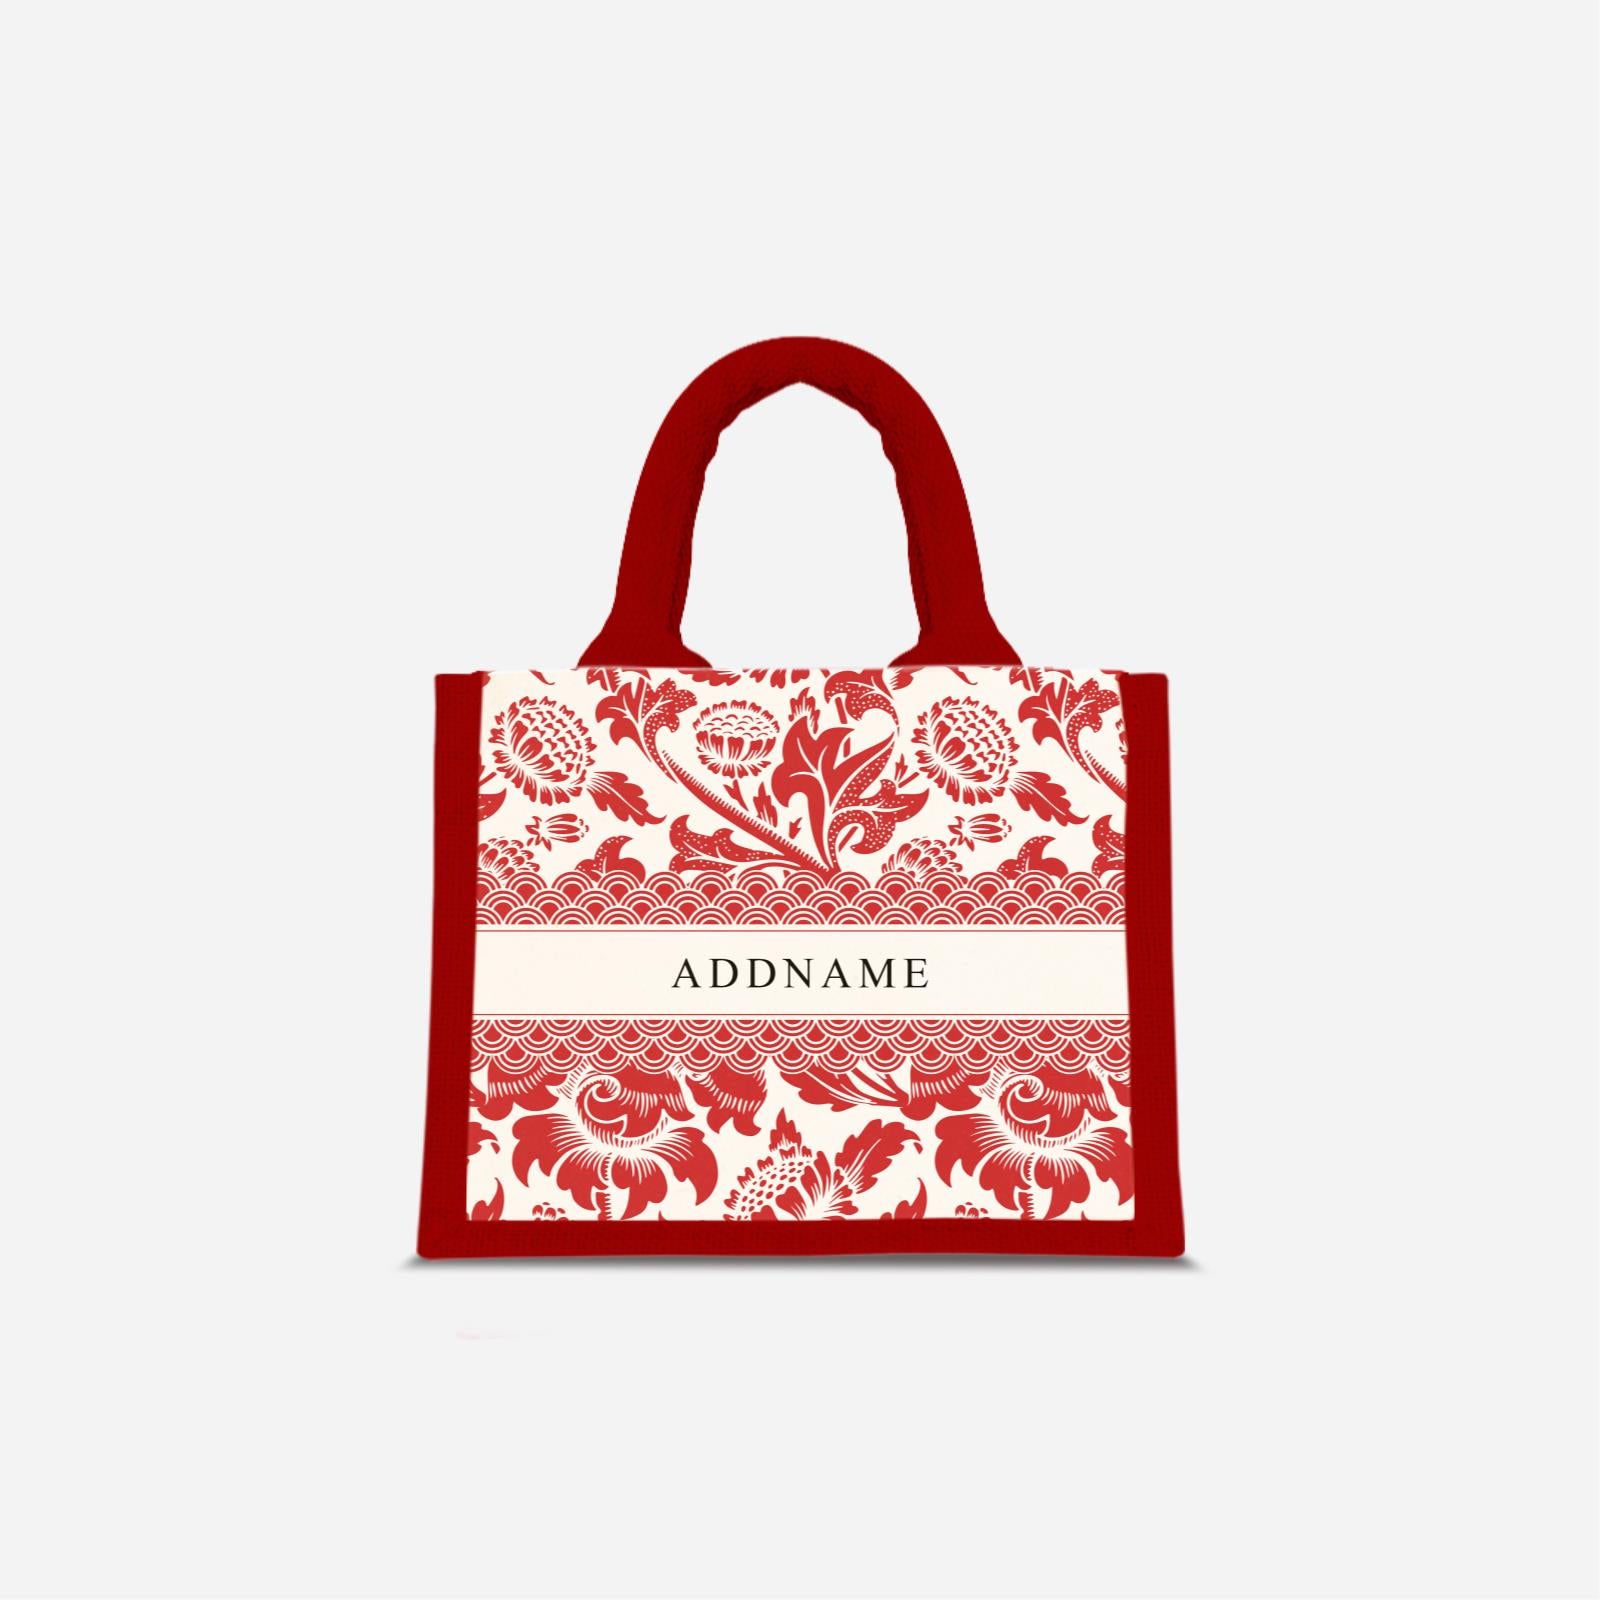 Limitless Opportunity Series - Red Jute Bag